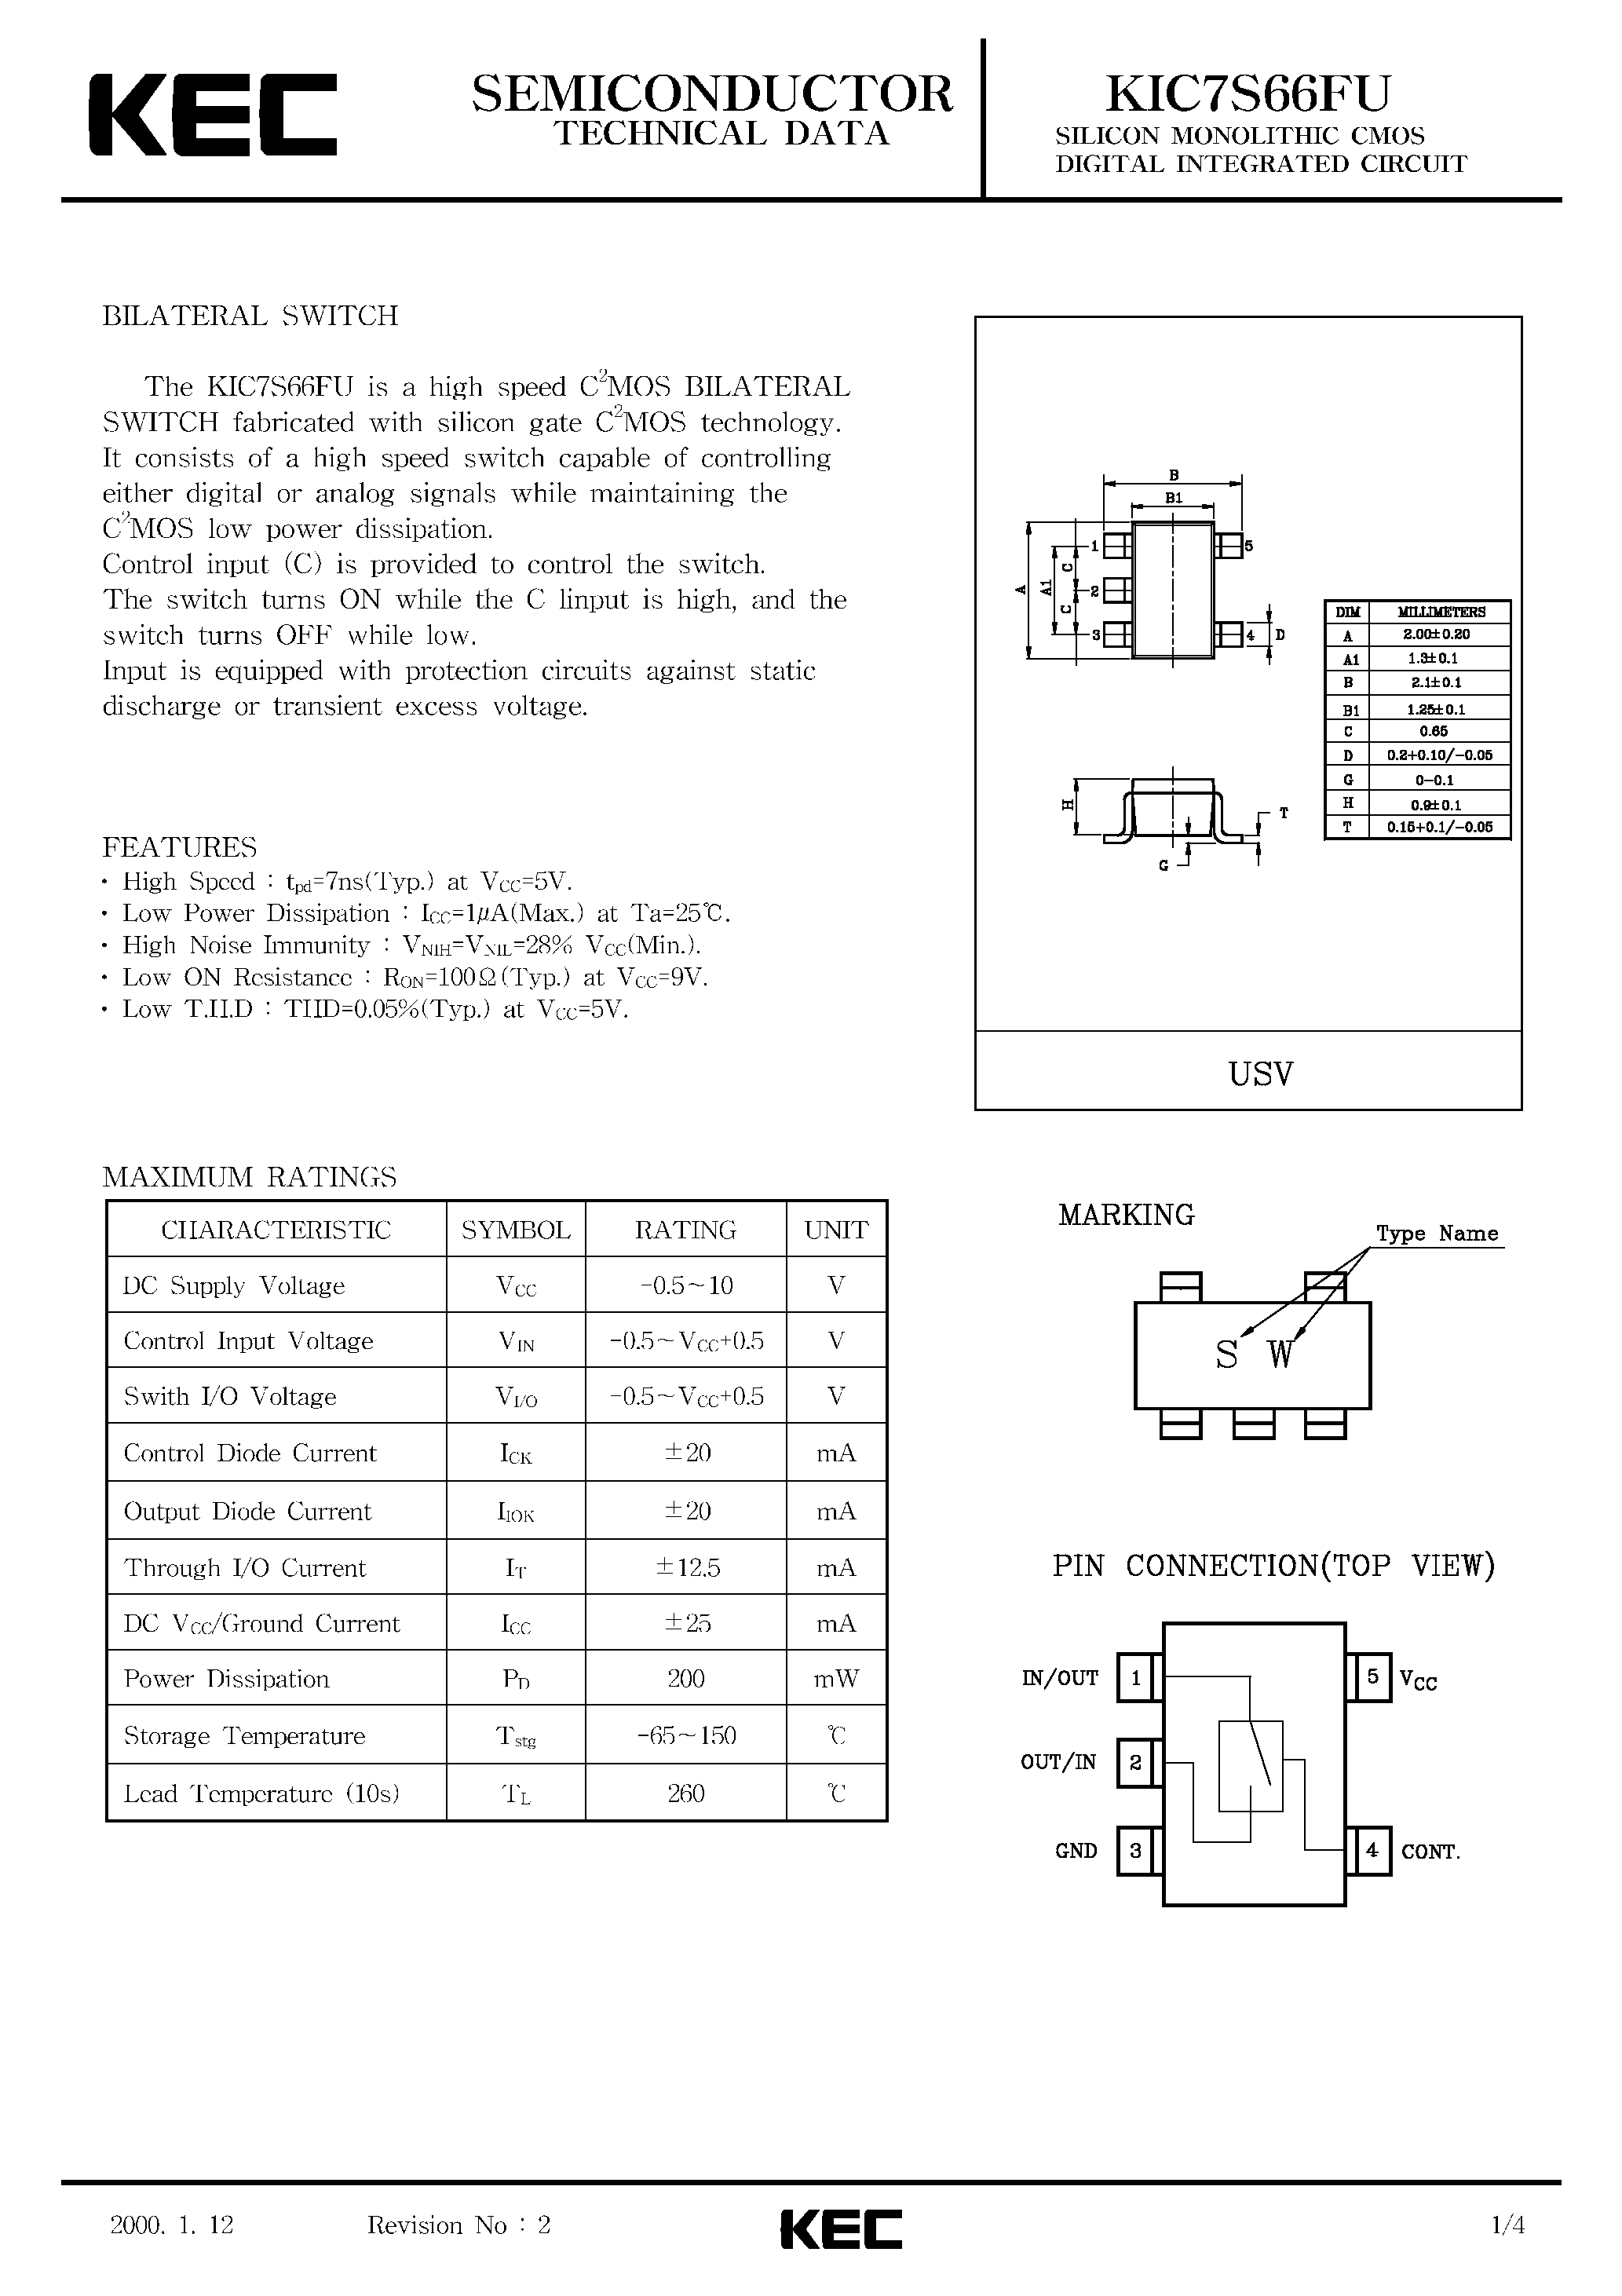 Datasheet KIC7S66FU - SILICON MONOLITHIC CMOS DIGITAL INTEGRATED CIRCUIT(BILATERAL SWITCH) page 1